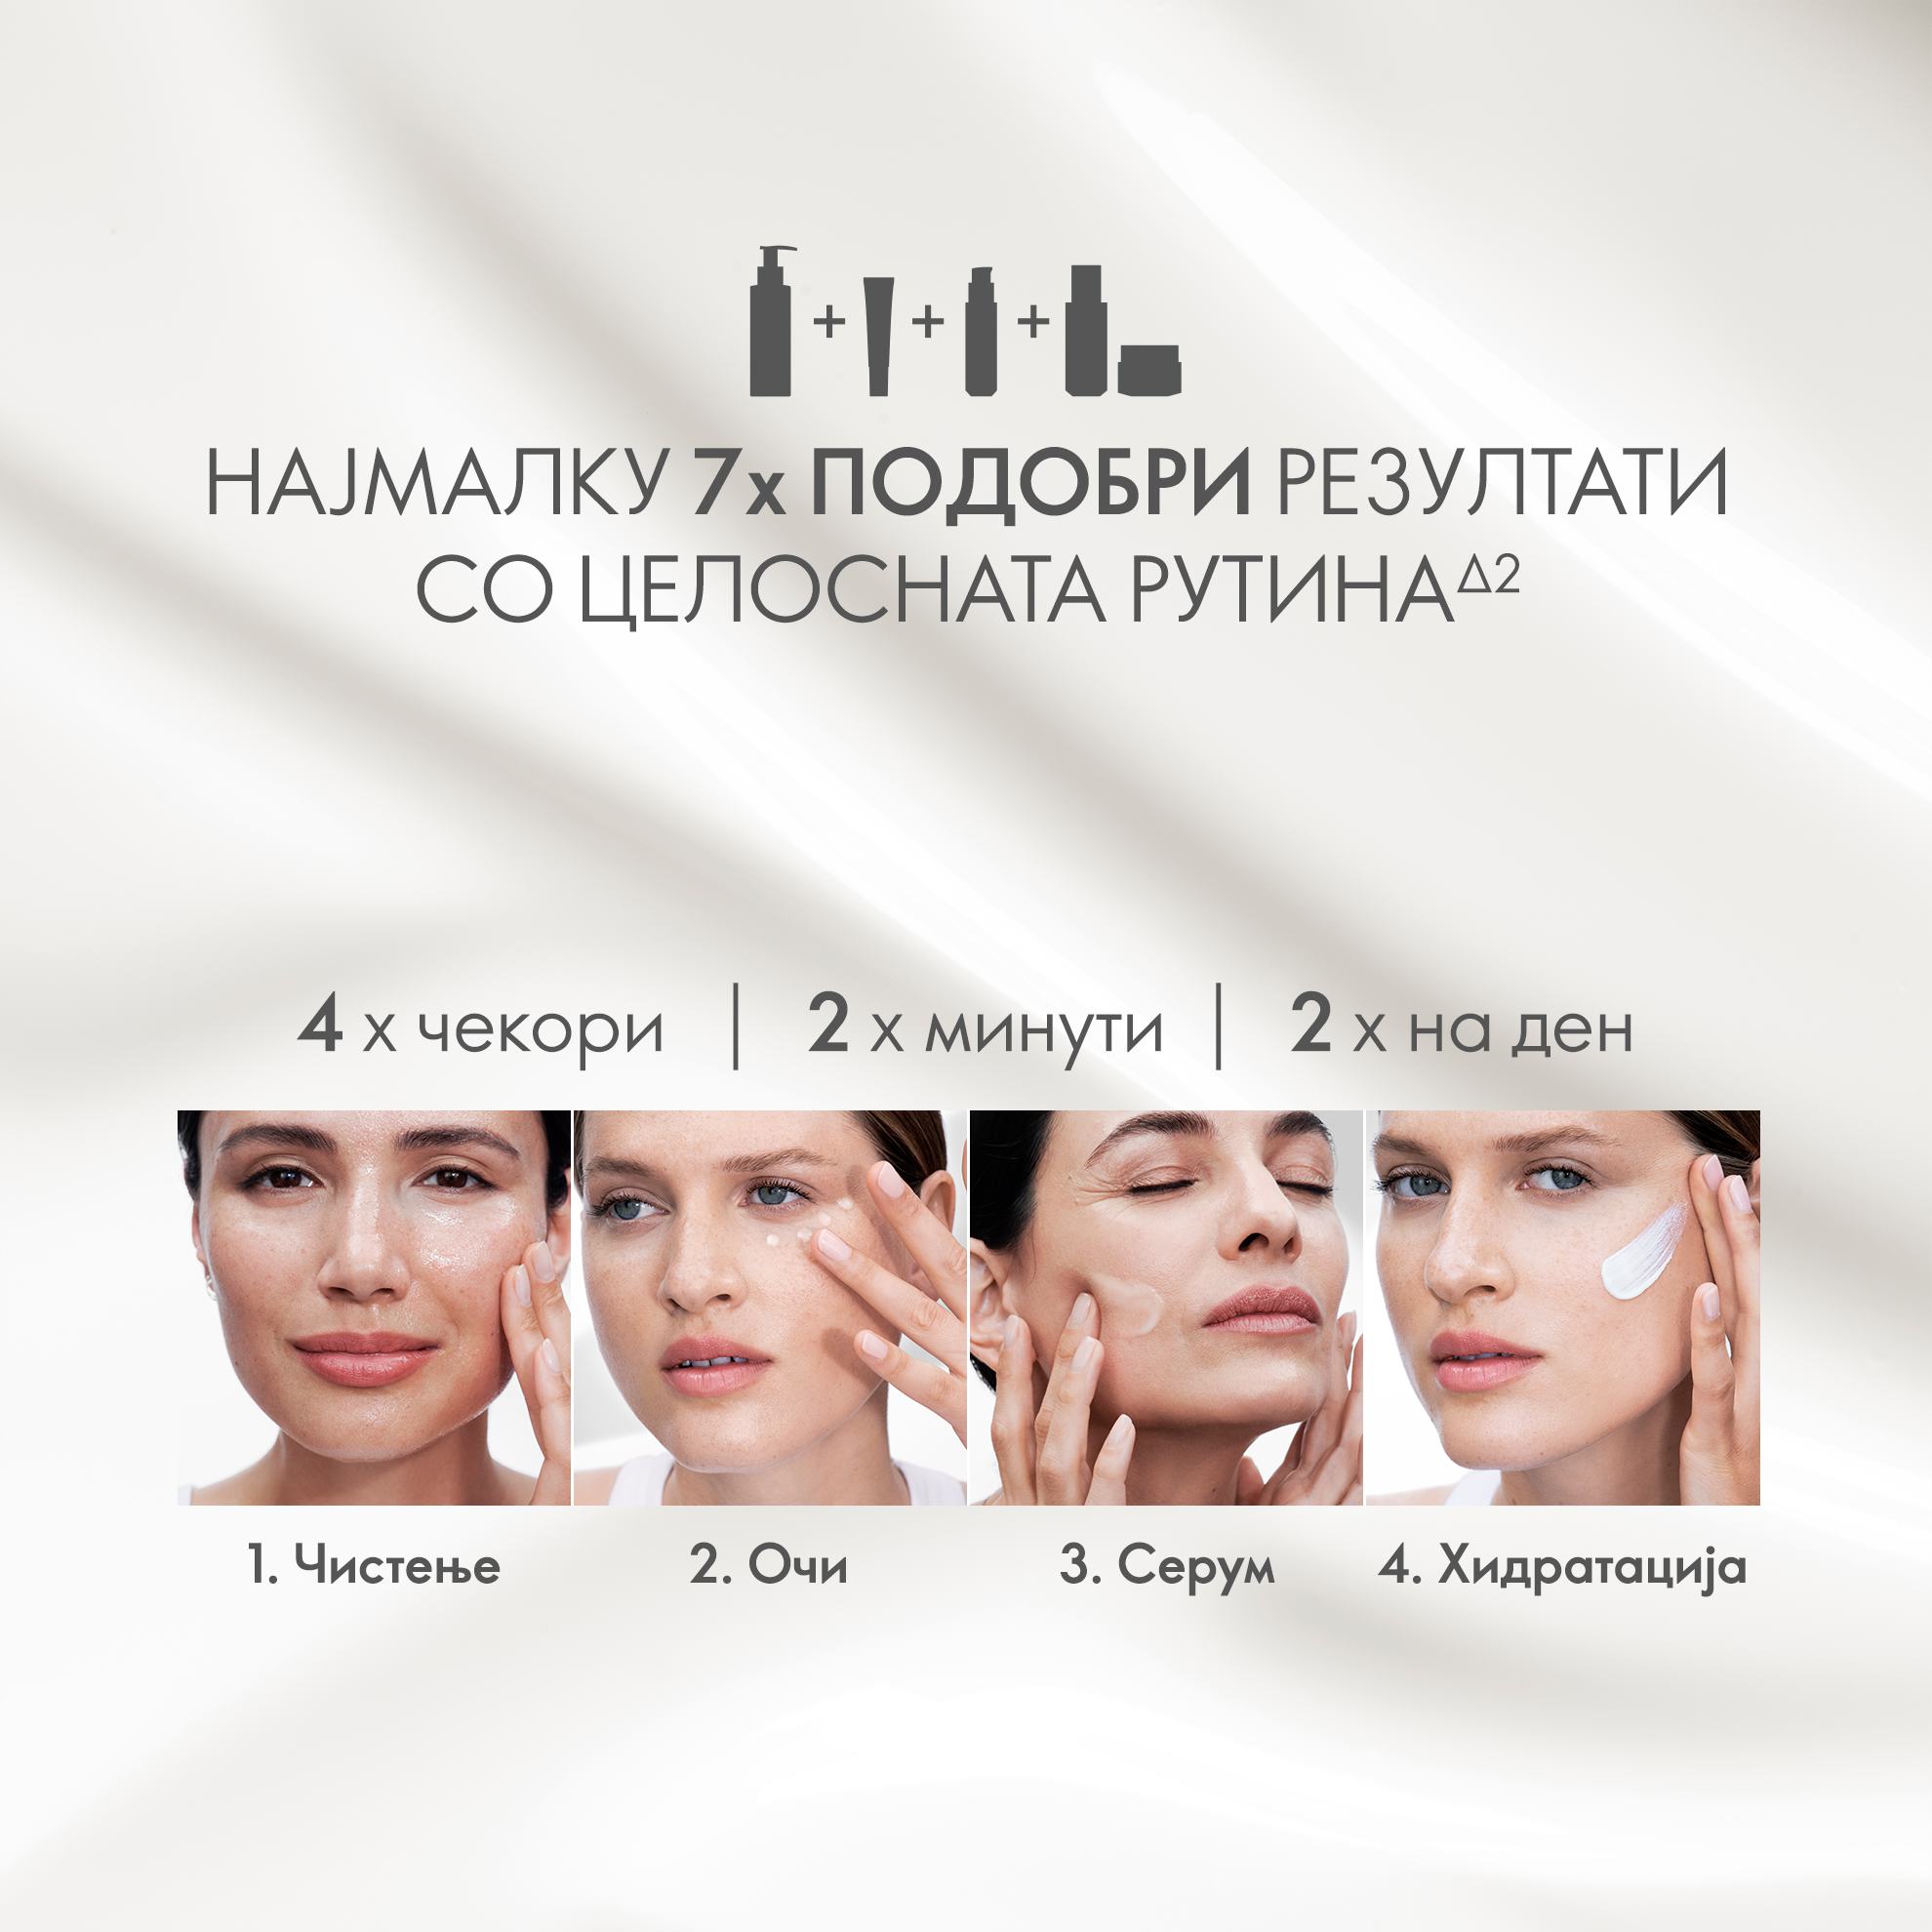 https://media-cdn.oriflame.com/productImage?externalMediaId=product-management-media%2fProducts%2f45595%2fMK%2f45595_4.png&id=17552692&version=2